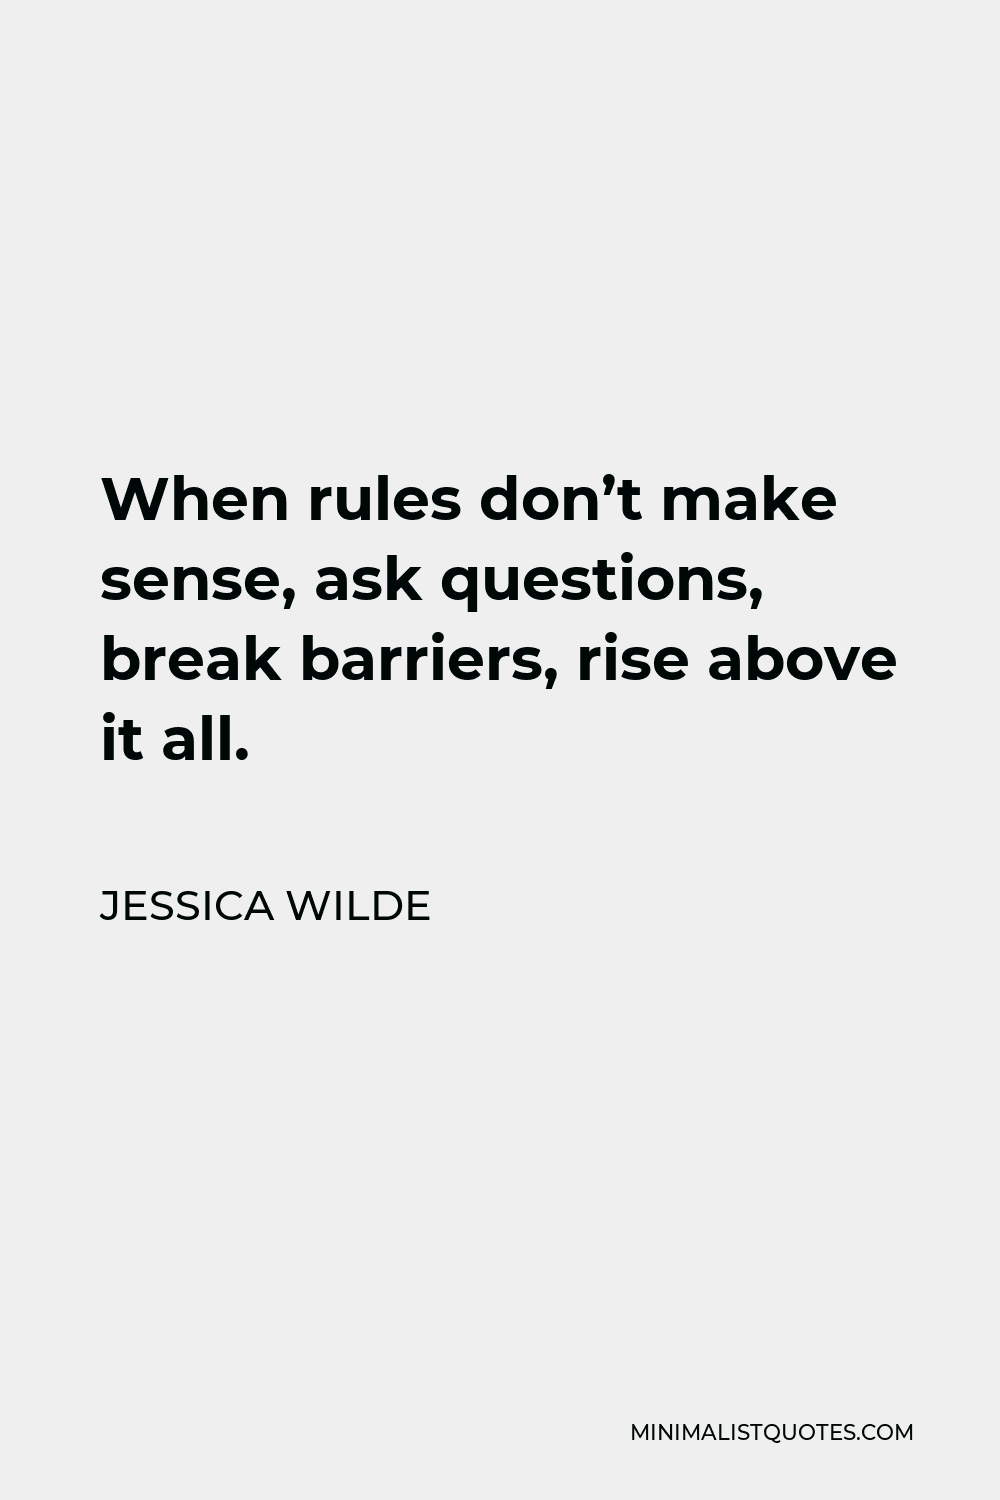 Jessica Wilde Quote - When rules don’t make sense, ask questions, break barriers, rise above it all.